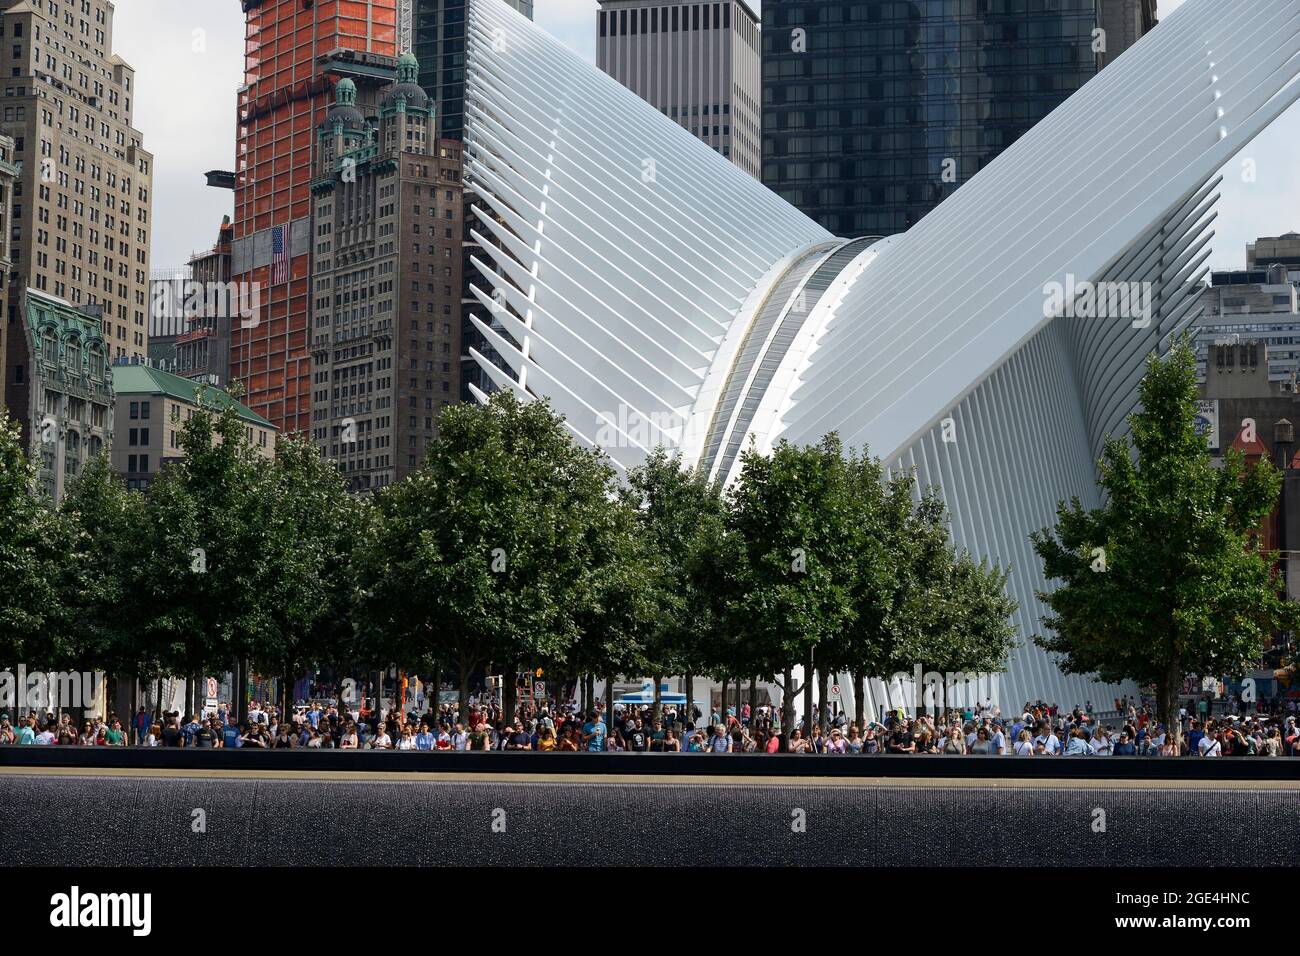 USA, New York City, 9/11 memorial Ground Zero for memory of the victims of terrorist attack of 11th September 2001 at tower of world trade center, reflecting pool / USA, New York, Ground Zero Mahnmal für Opfer der Terroranschlaege am 11.  September 2001 am WTC world trade center, Fundamentloch eines eingestürzten Towers mit Wasserbassin reflecting pool Stock Photo